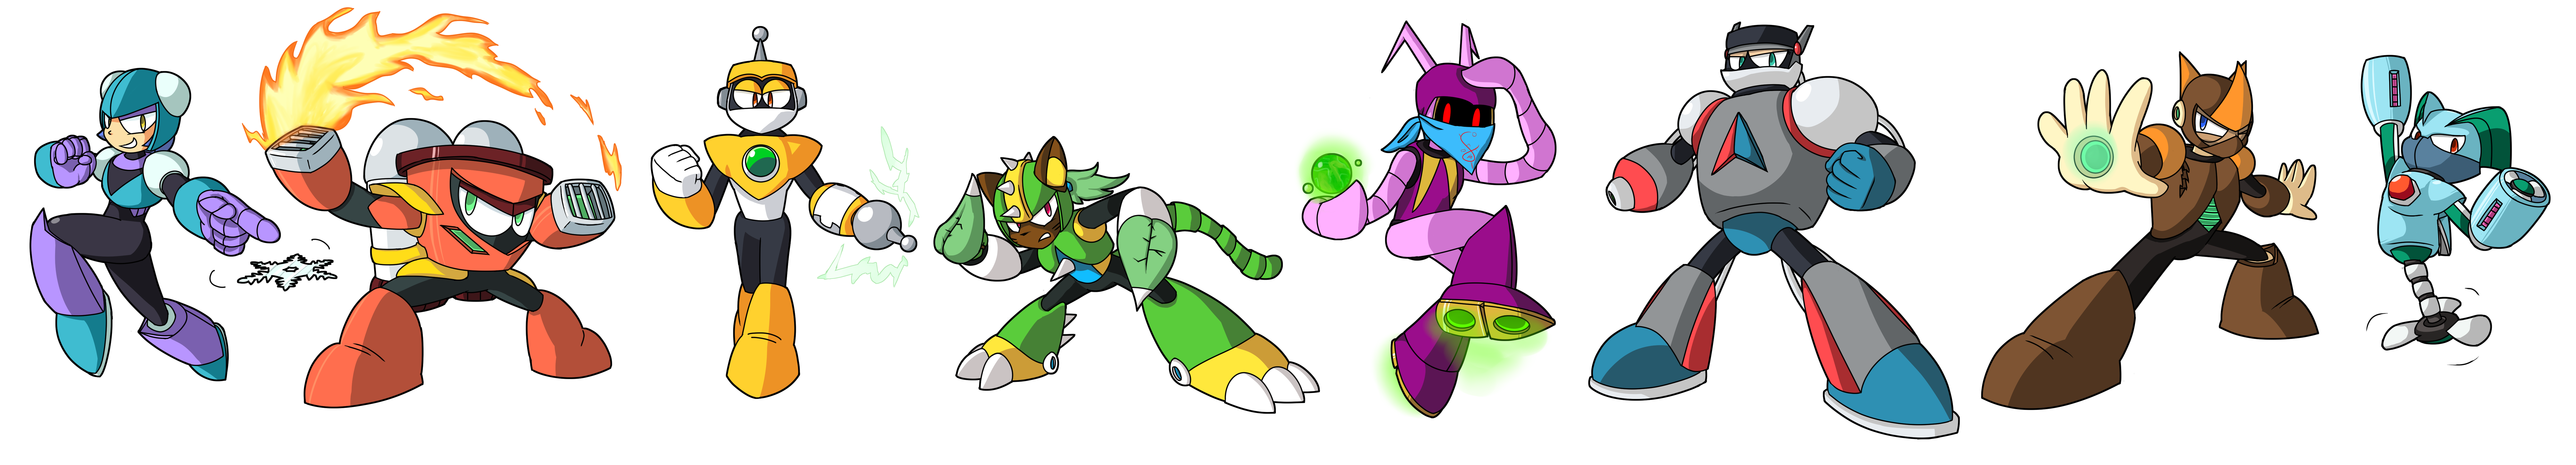 Fan Made Robot Masters By Ultimateyoshi On Deviantart